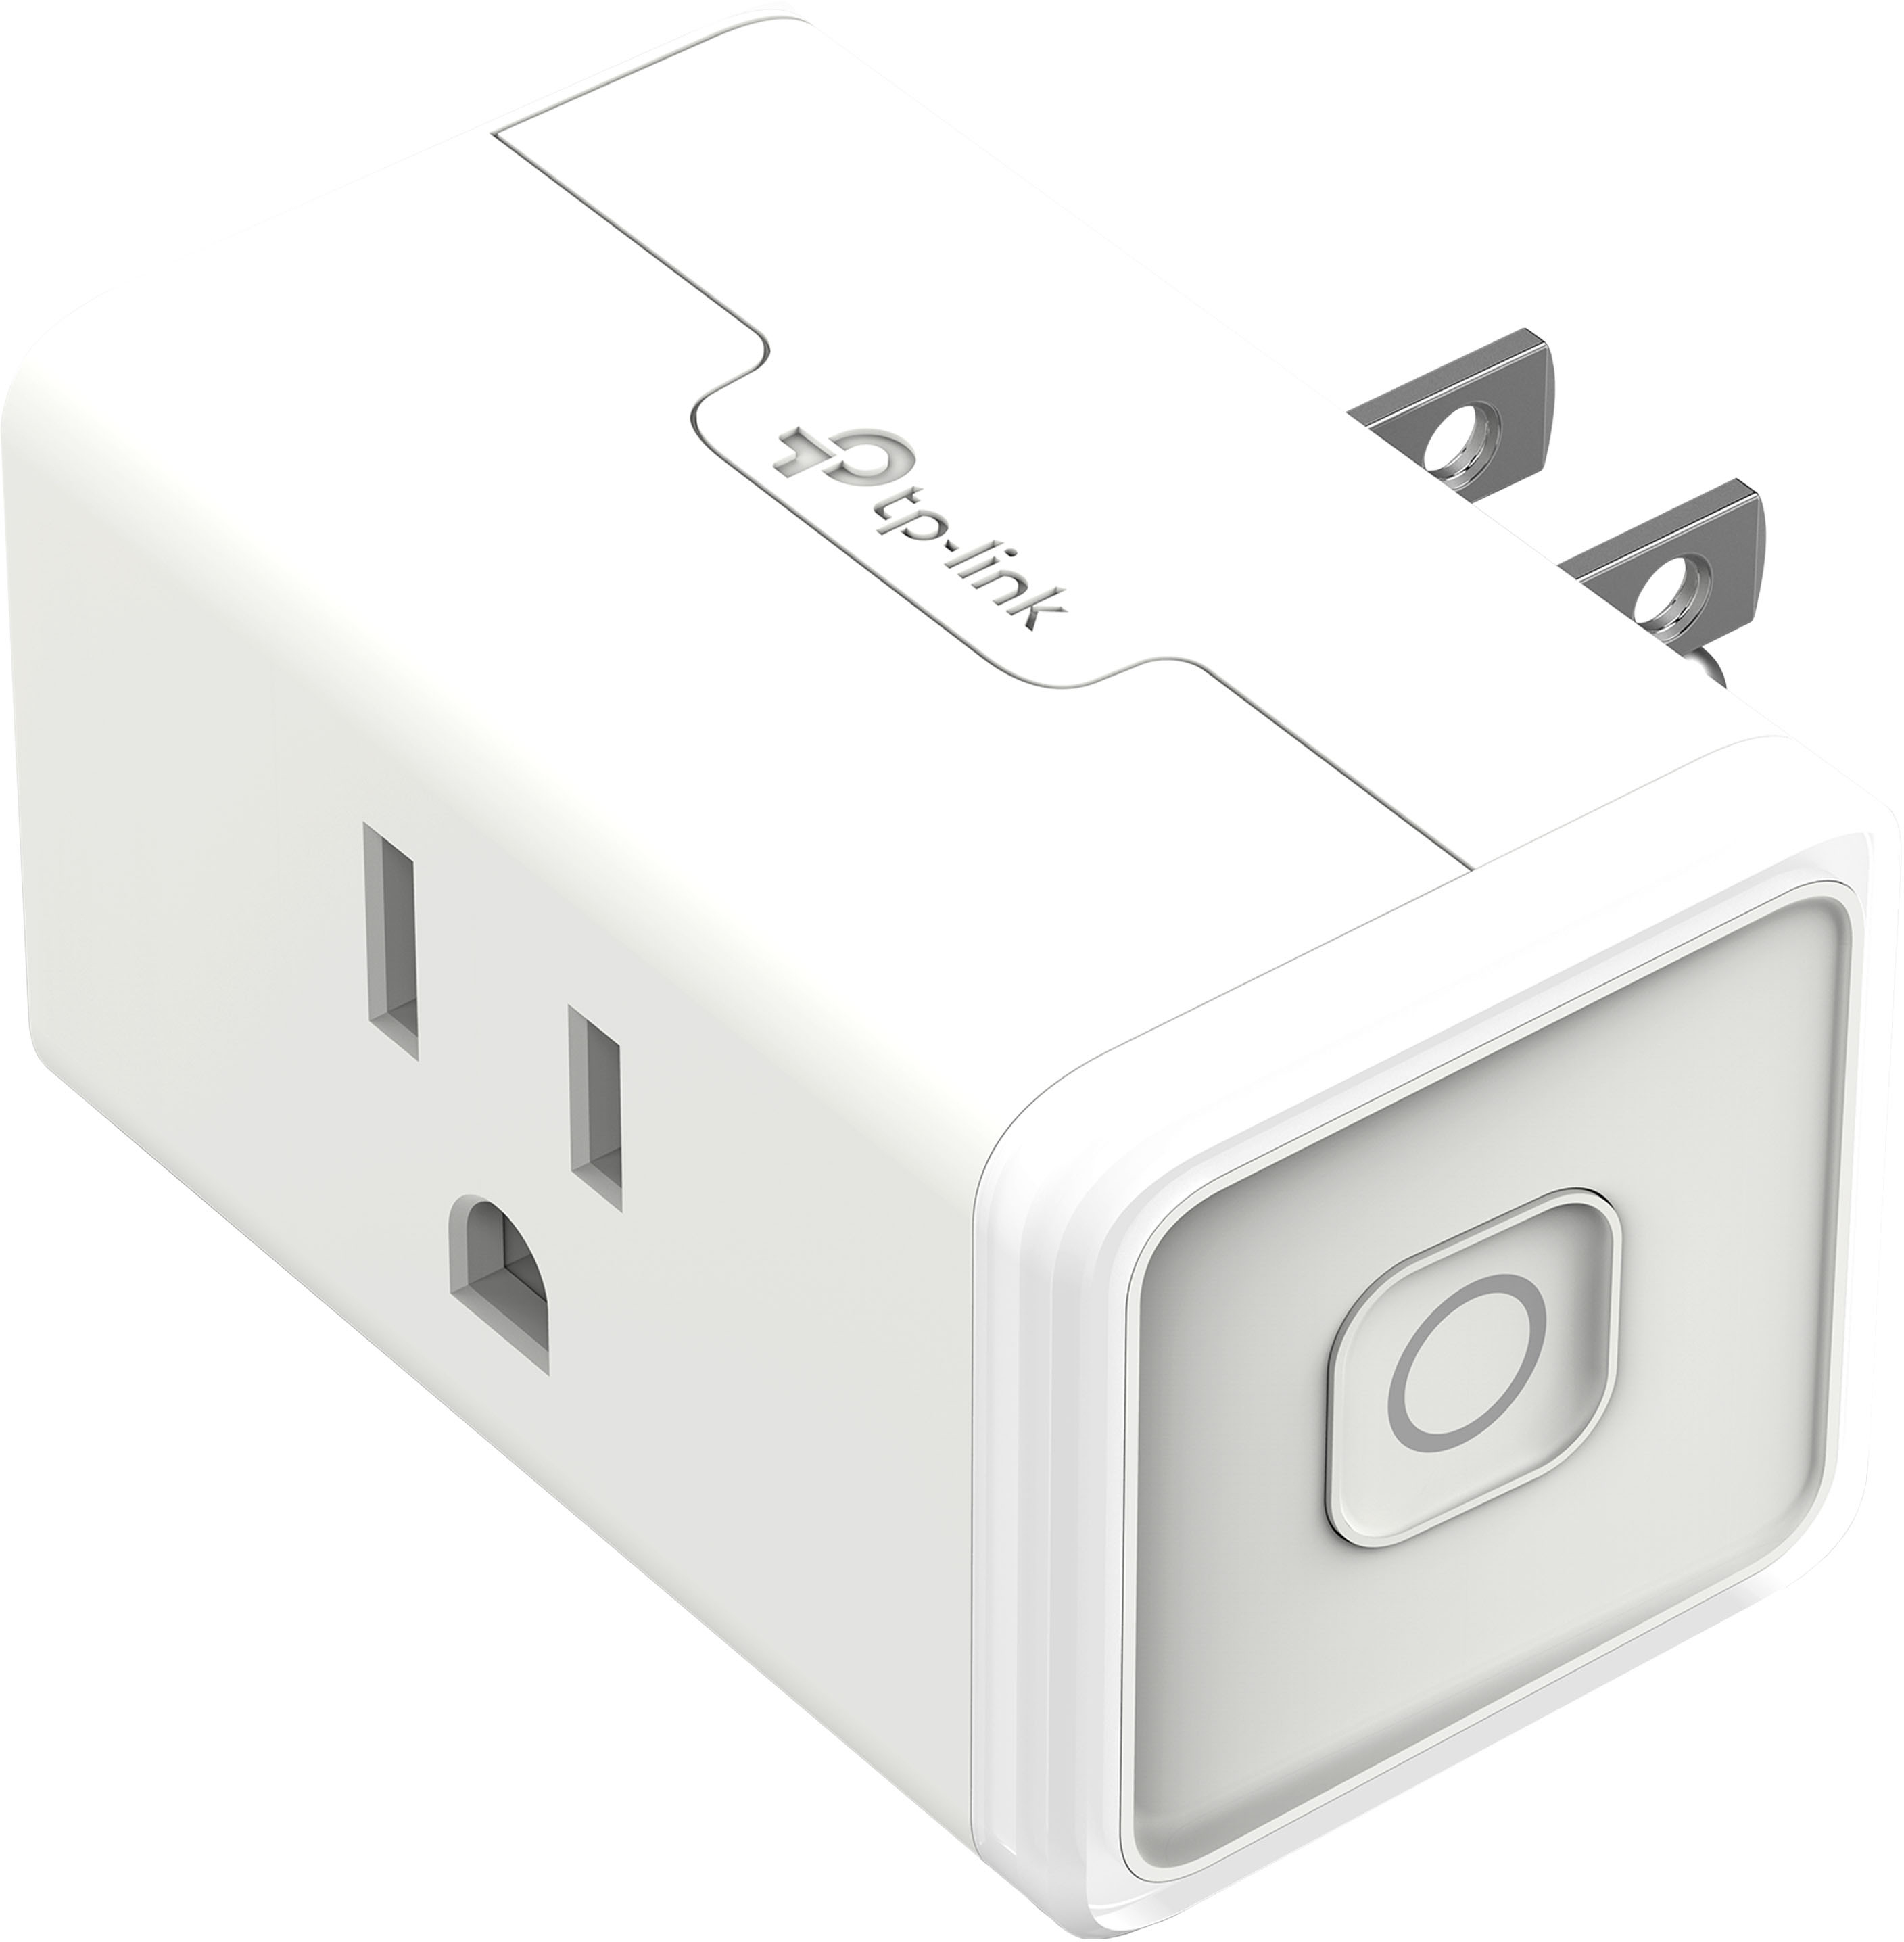 Kasa Smart Plug Mini 15A, Apple HomeKit Supported, Smart Outlet Works with  Siri, Alexa & Google Home, UL Certified, App Control, Scheduling, Timer